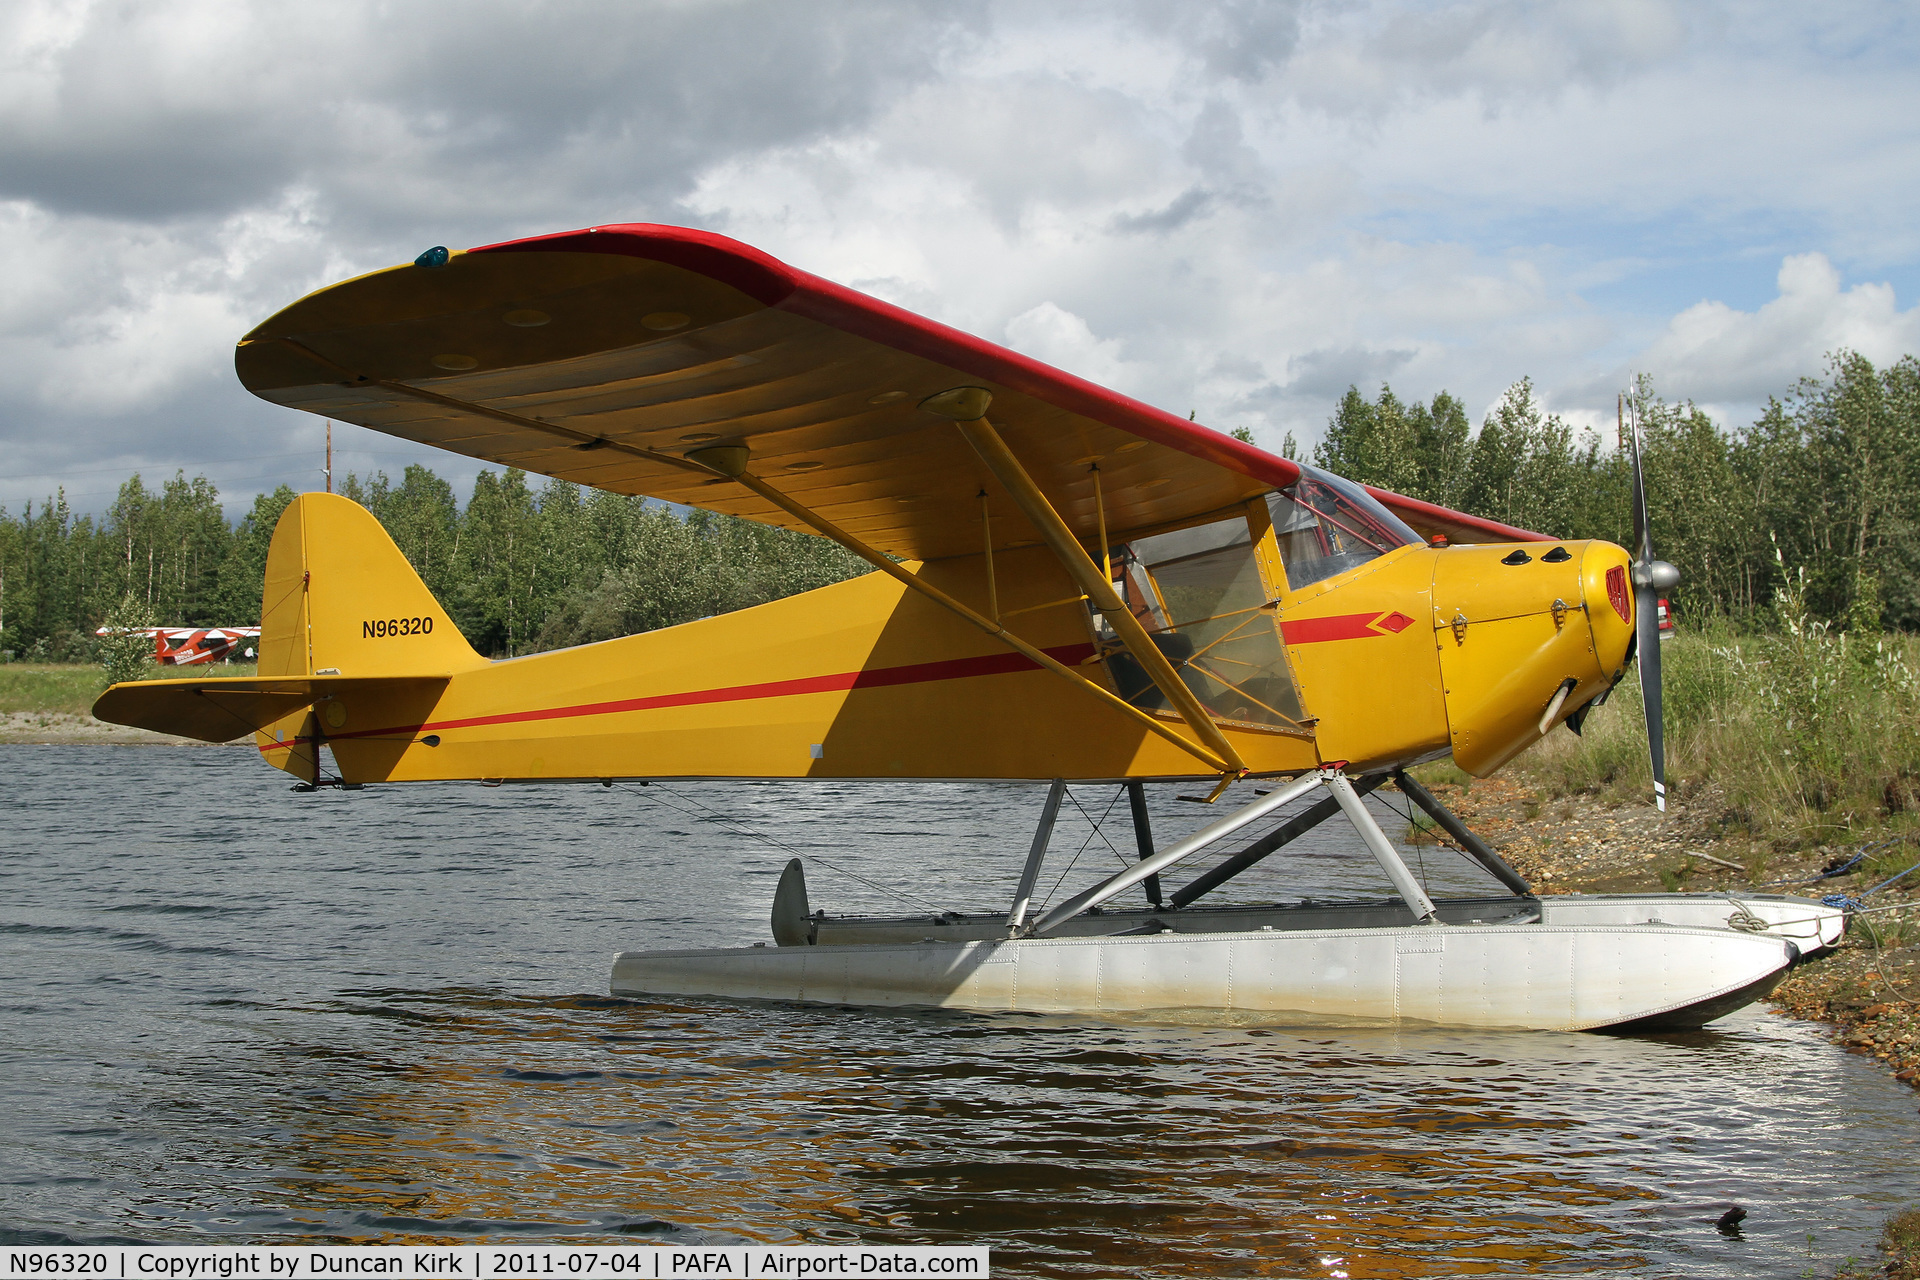 N96320, 1946 Taylorcraft BC12-D C/N 8620, One of the oldest planes seen on floats